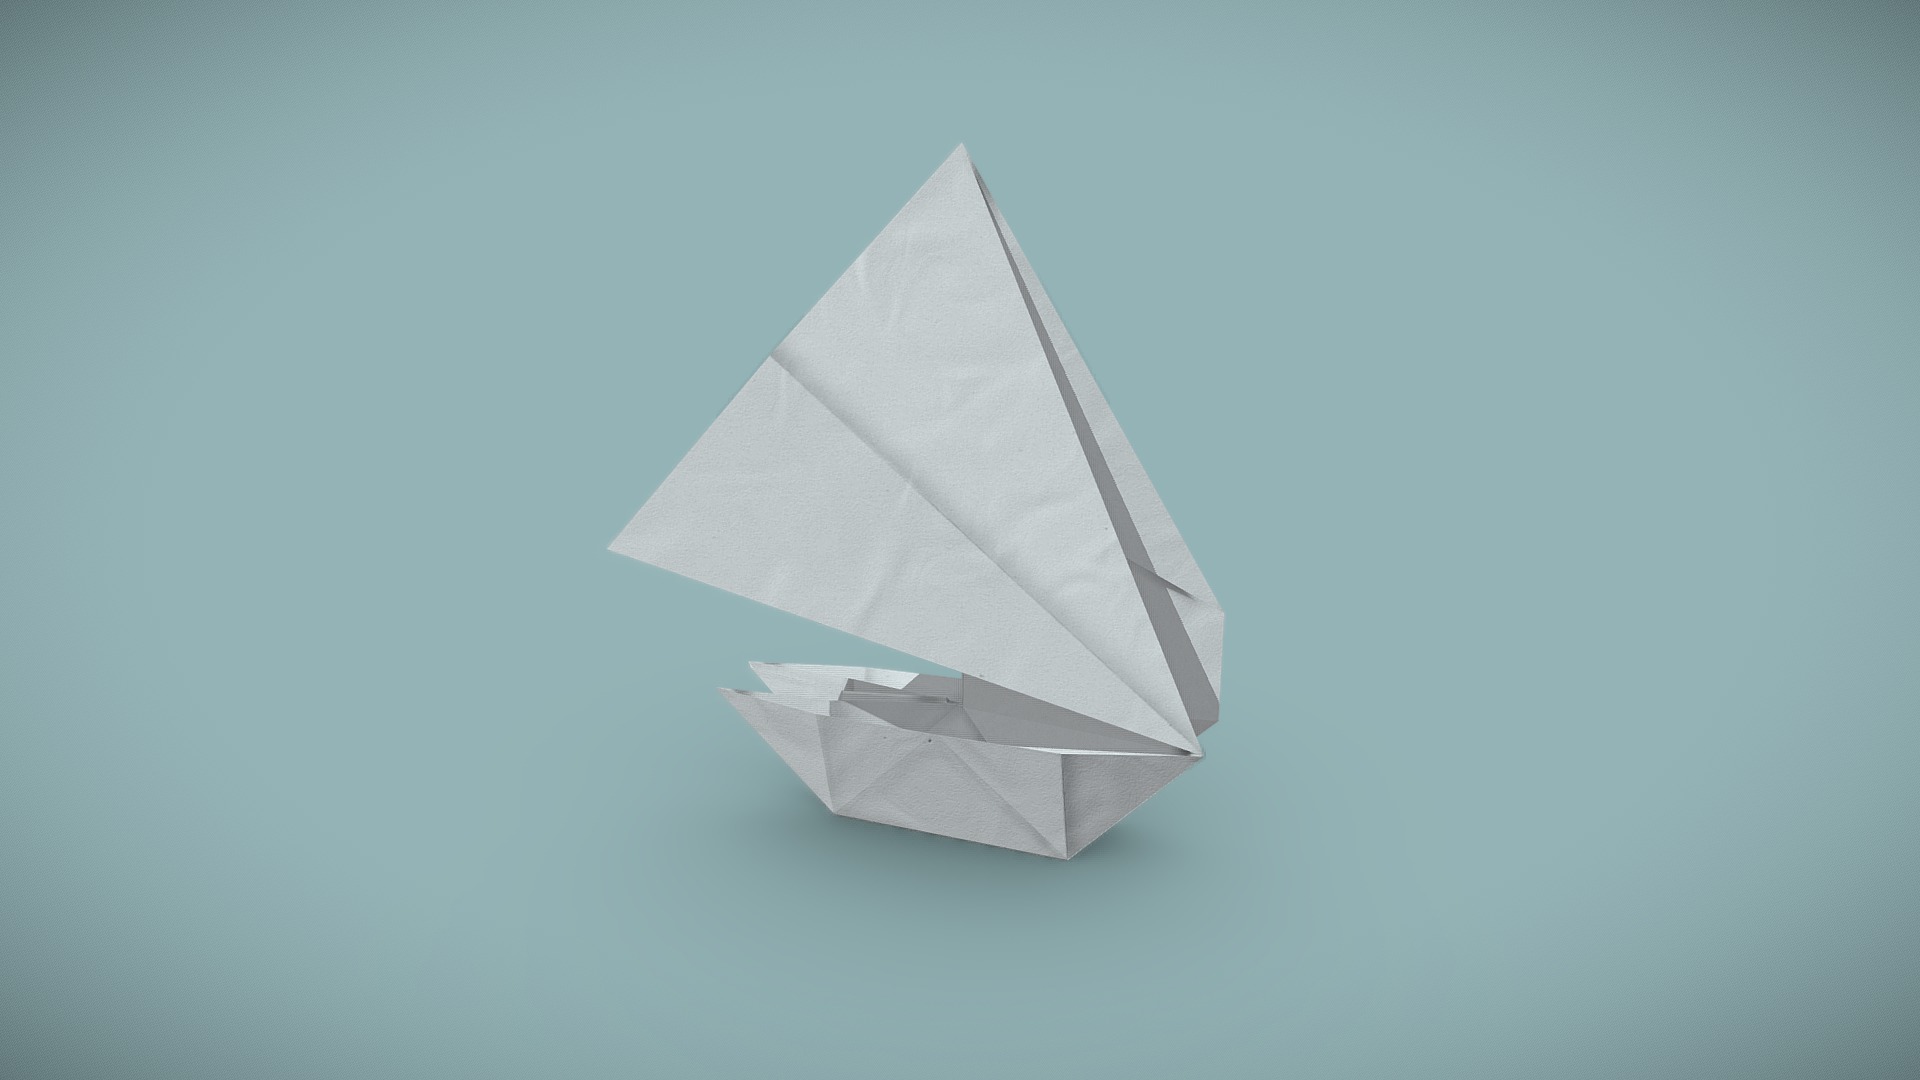 3D model Origami boat - This is a 3D model of the Origami boat. The 3D model is about a paper airplane in the sky.